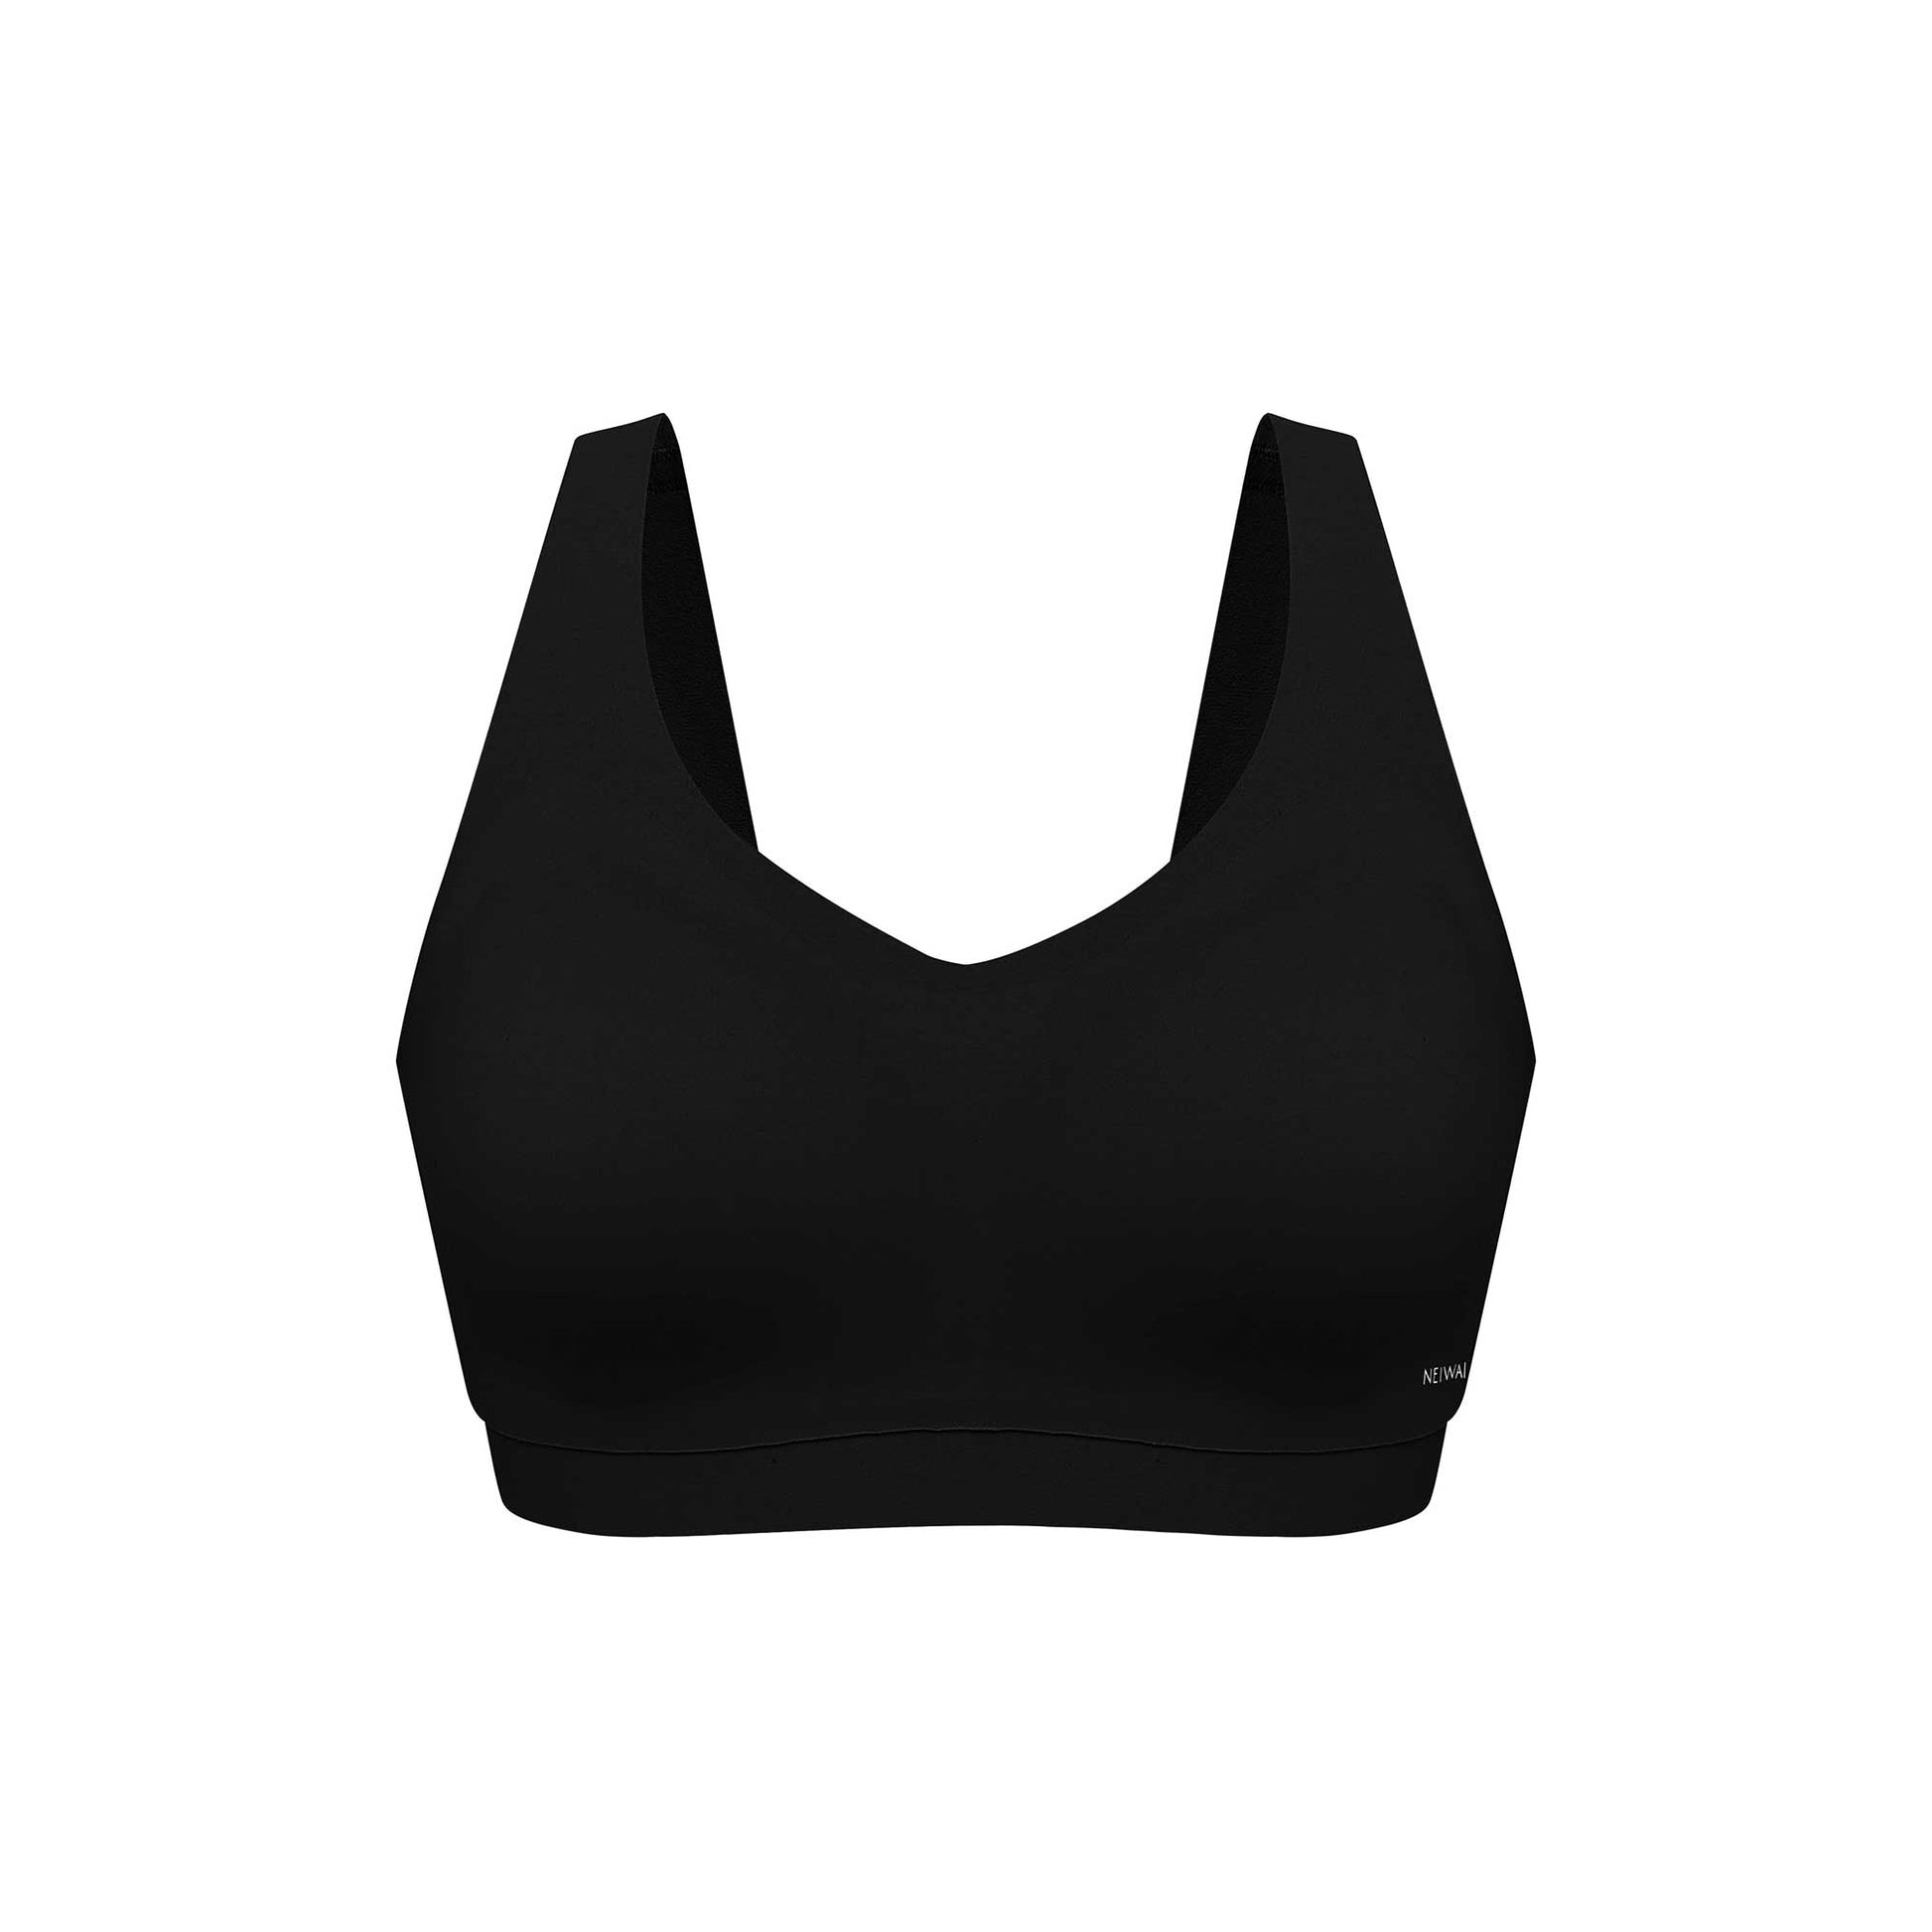 NEIWAI - Our #BarelyZero Fixed Cup Clasp Bra is the first